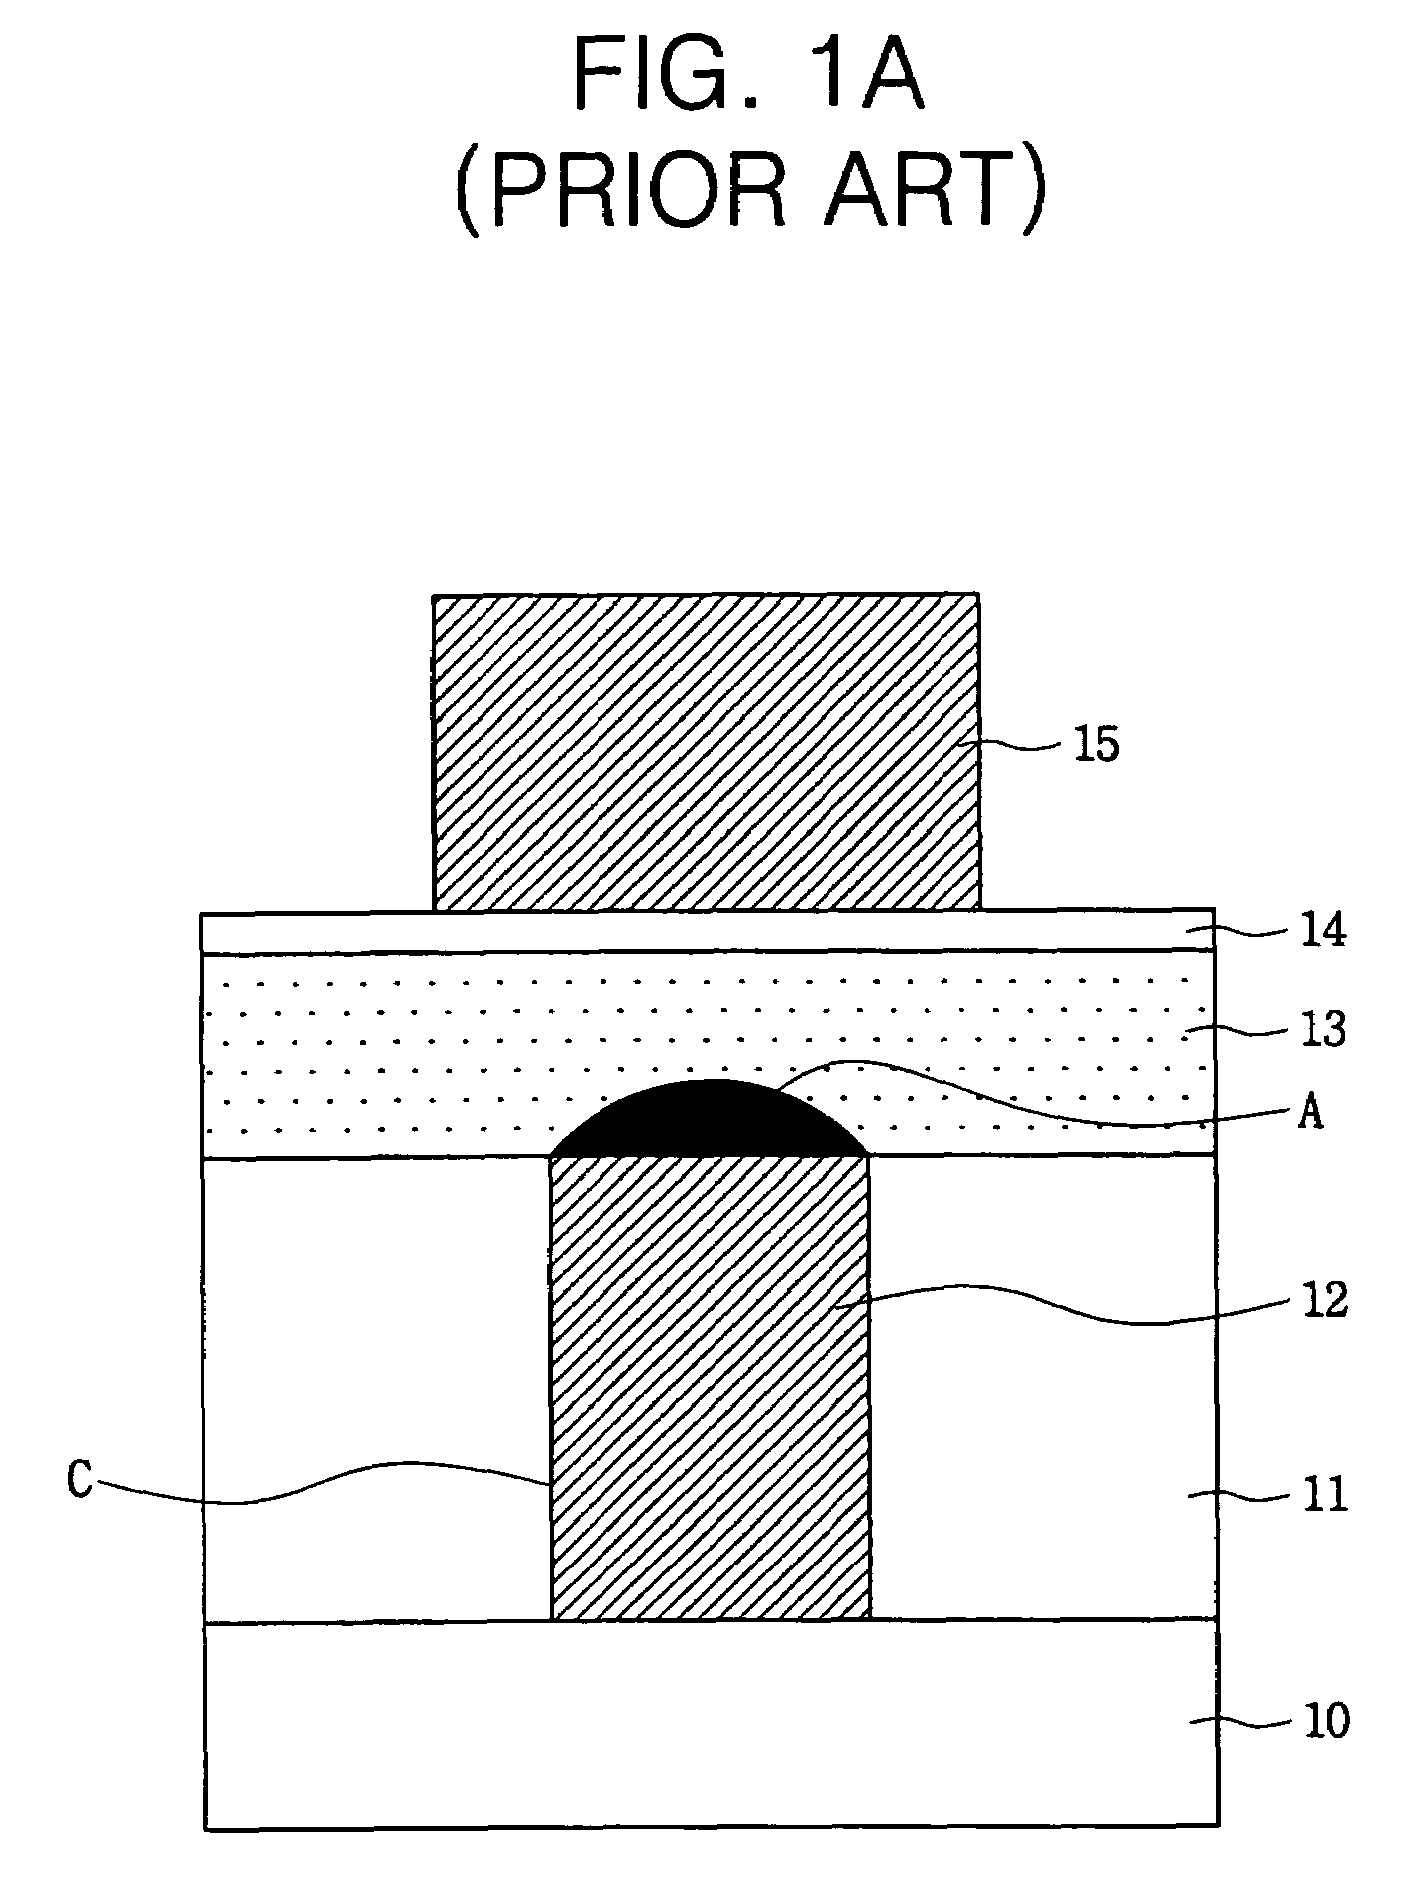 Phase change memory devices having phase change area in porous dielectric layer